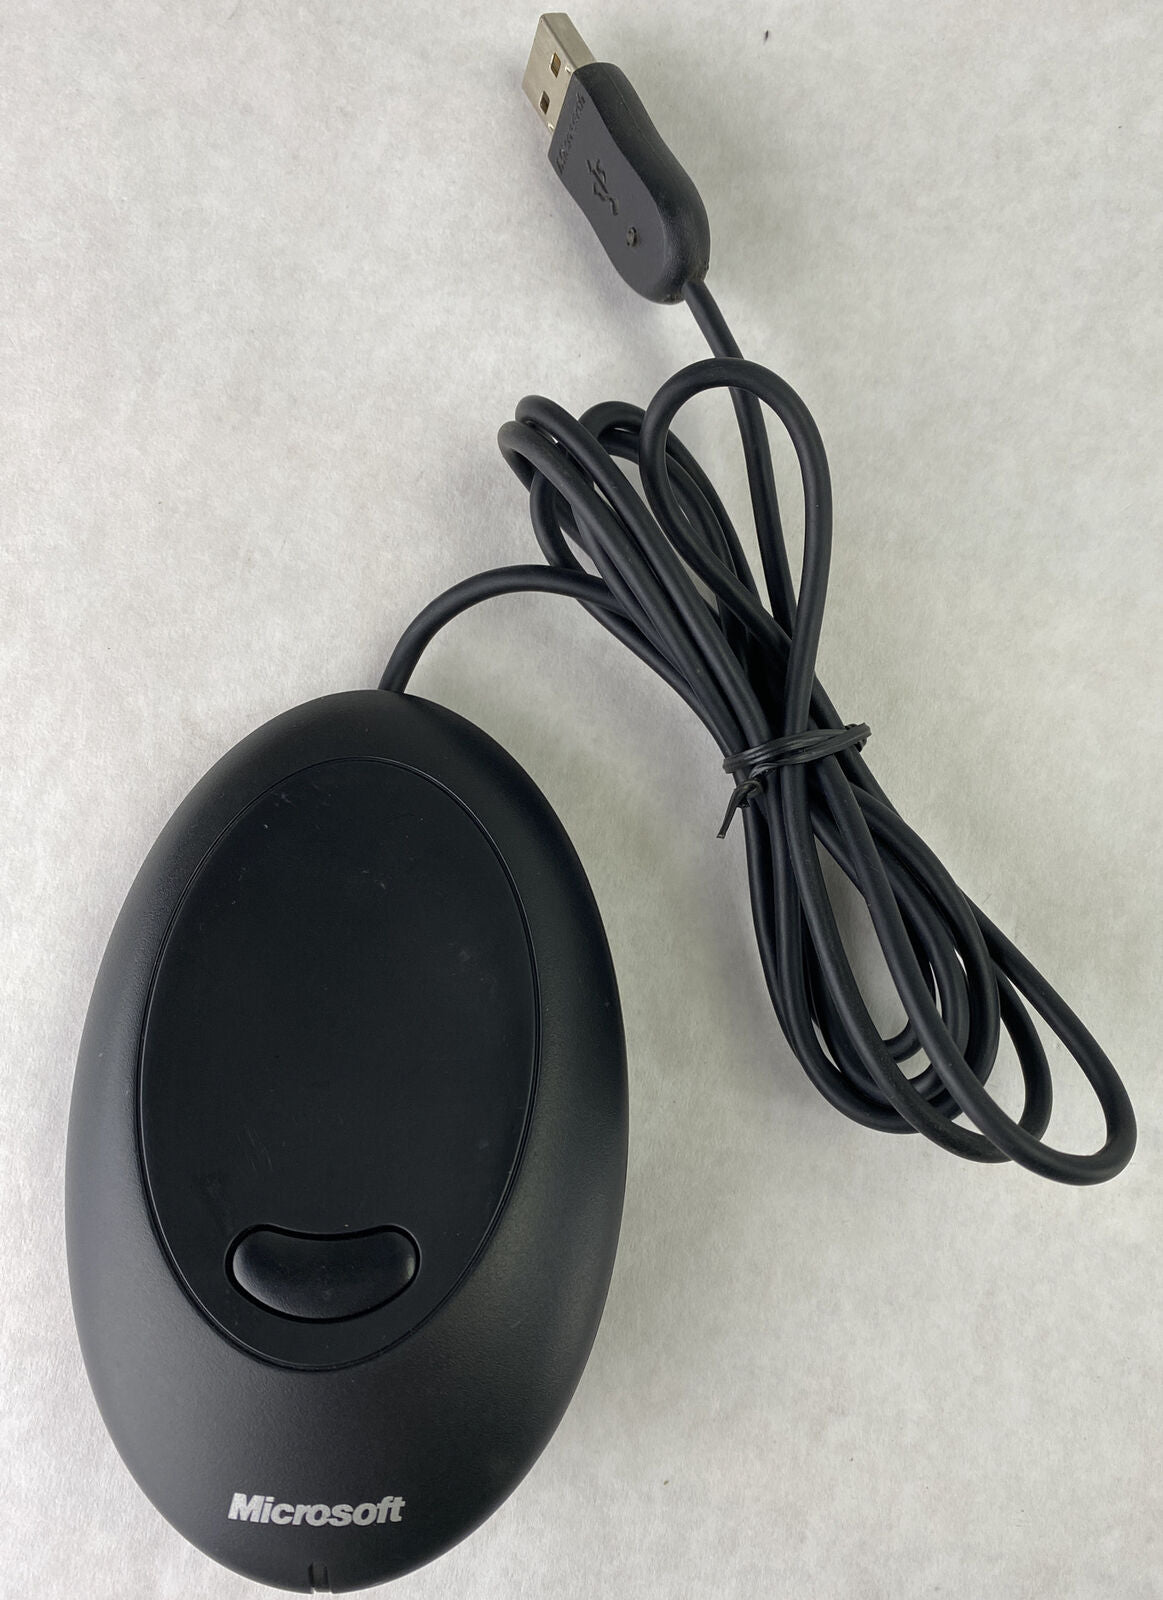 Microsoft 1013 X801756-103 USB Wireless Optical Mouse Receiver 2.0 ONLY